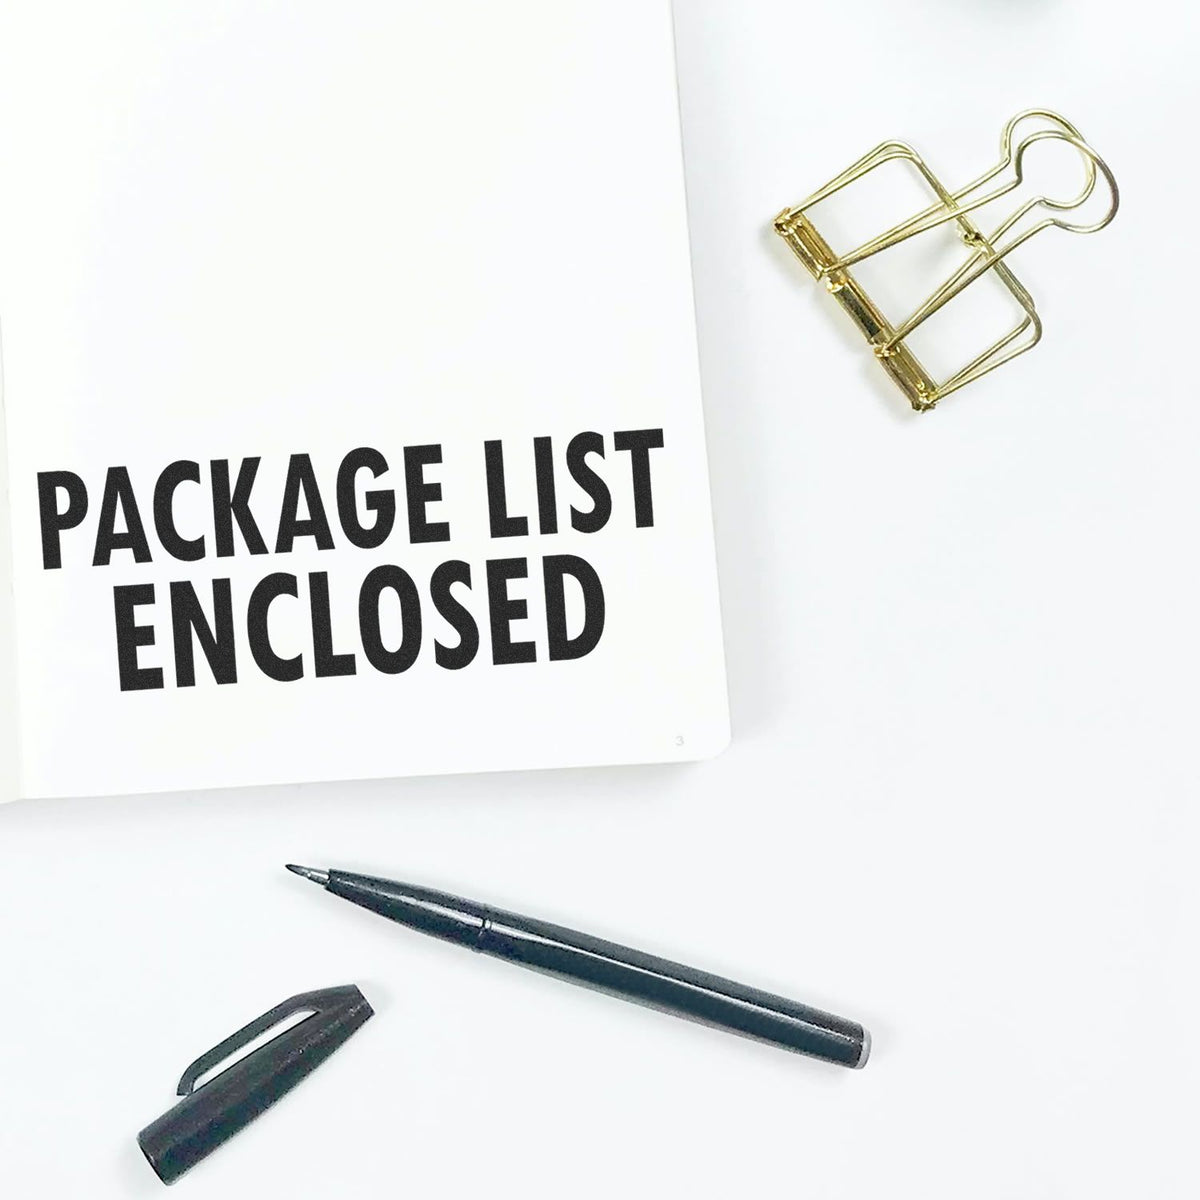 Large Package List Enclosed Rubber Stamp Lifestyle Photo